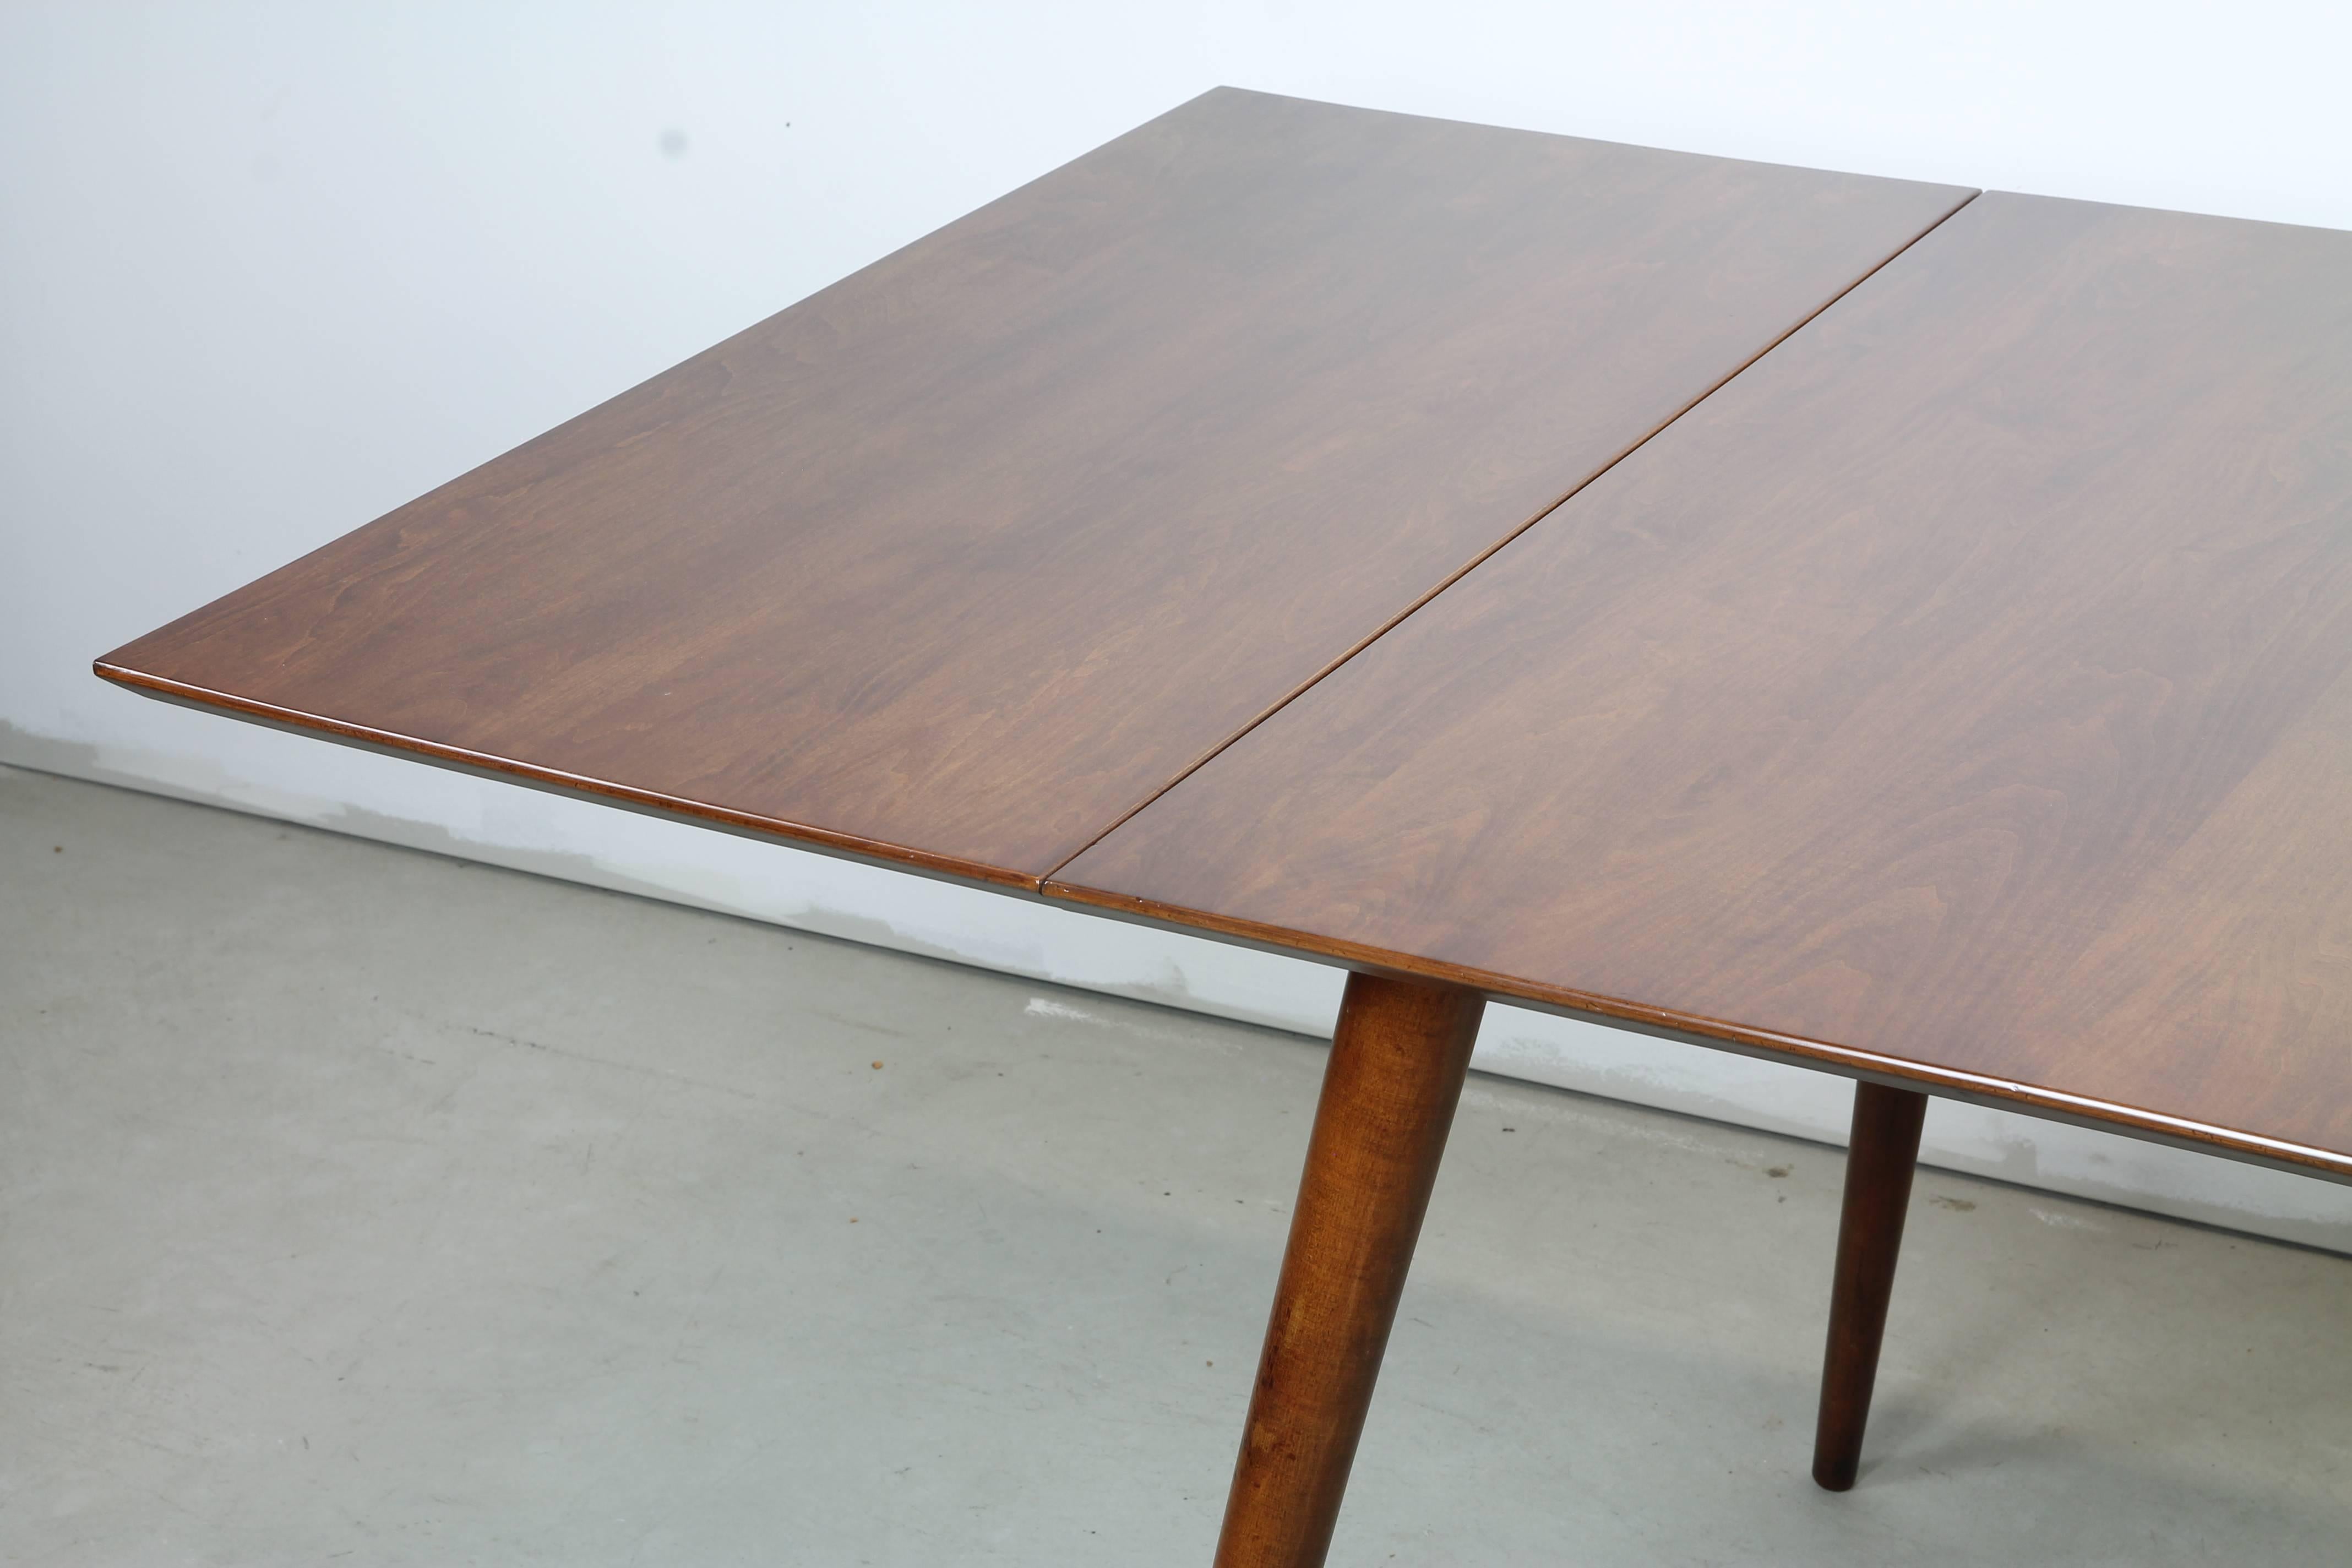 Solid dining table with two leaves by Paul McCobb as part of the Planner Group of furniture for Winchendon. A straightforward, egalitarian dining table with stunning lines and honest construction.